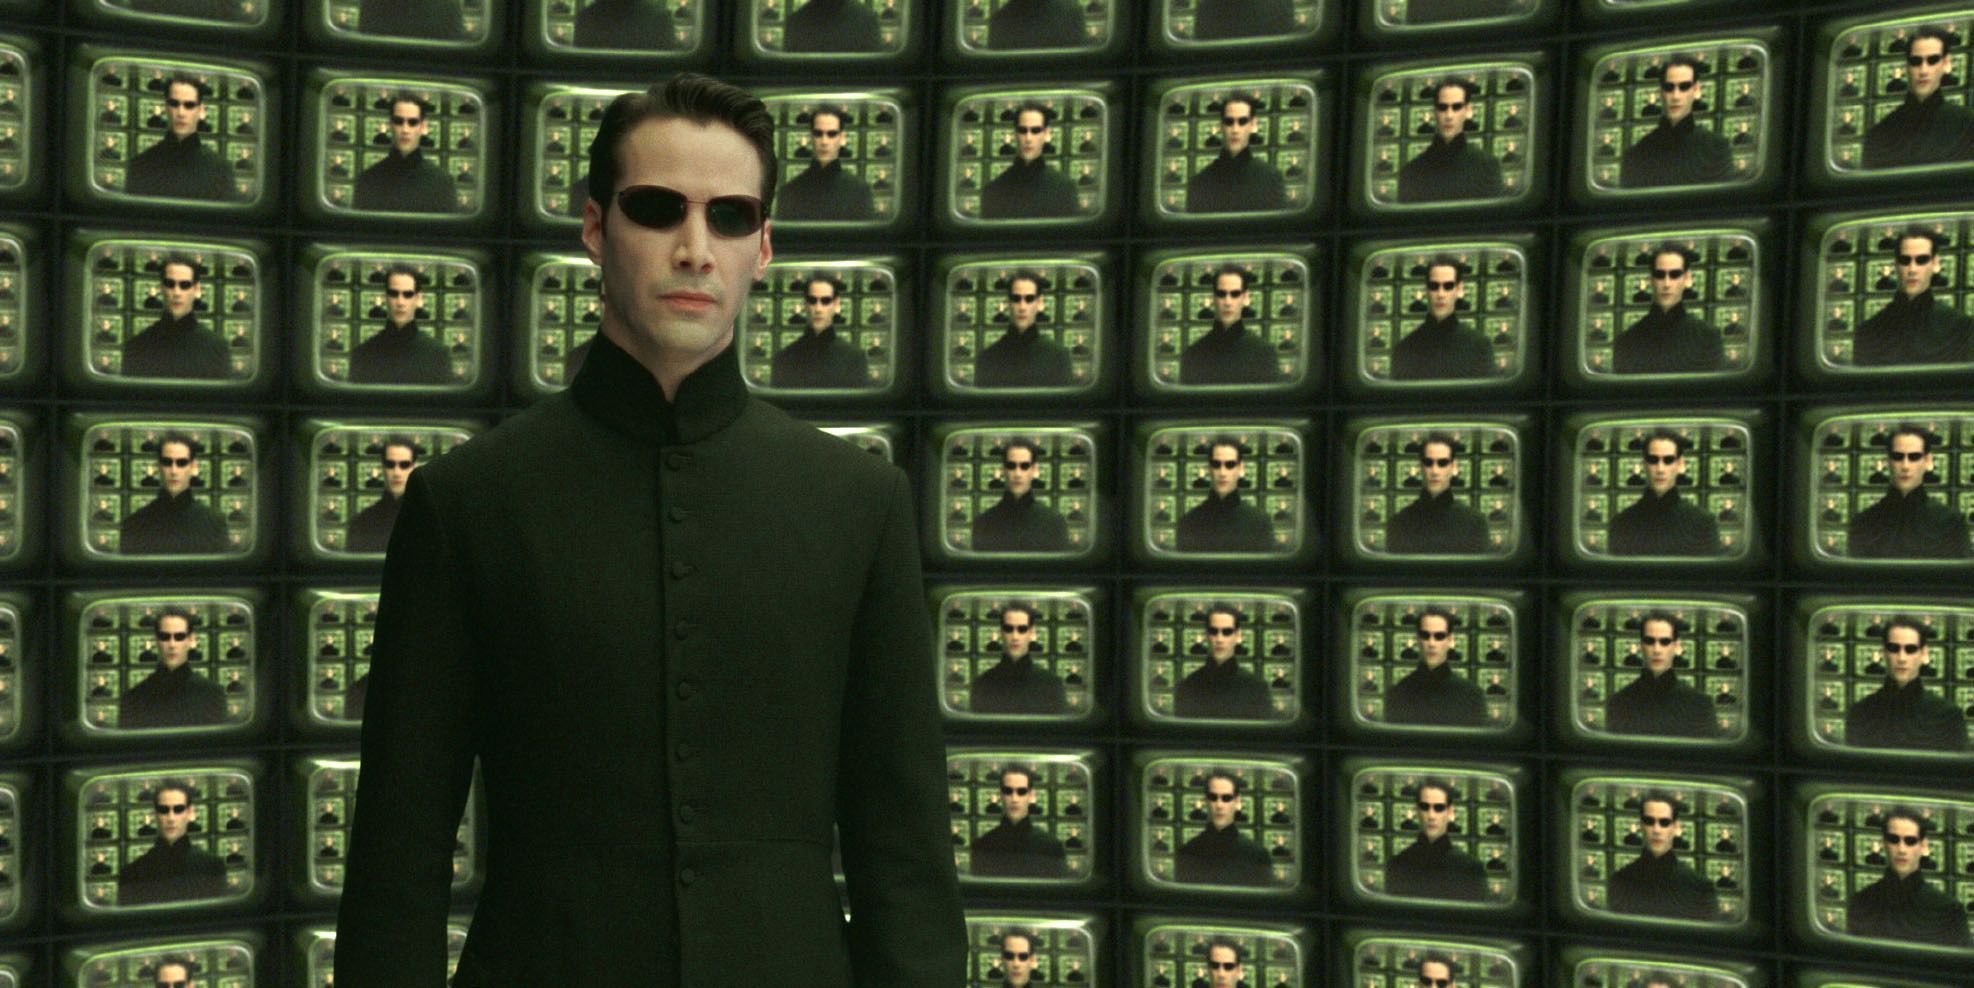 The Matrix is a trans metaphor – here’s why I’ve always thought so